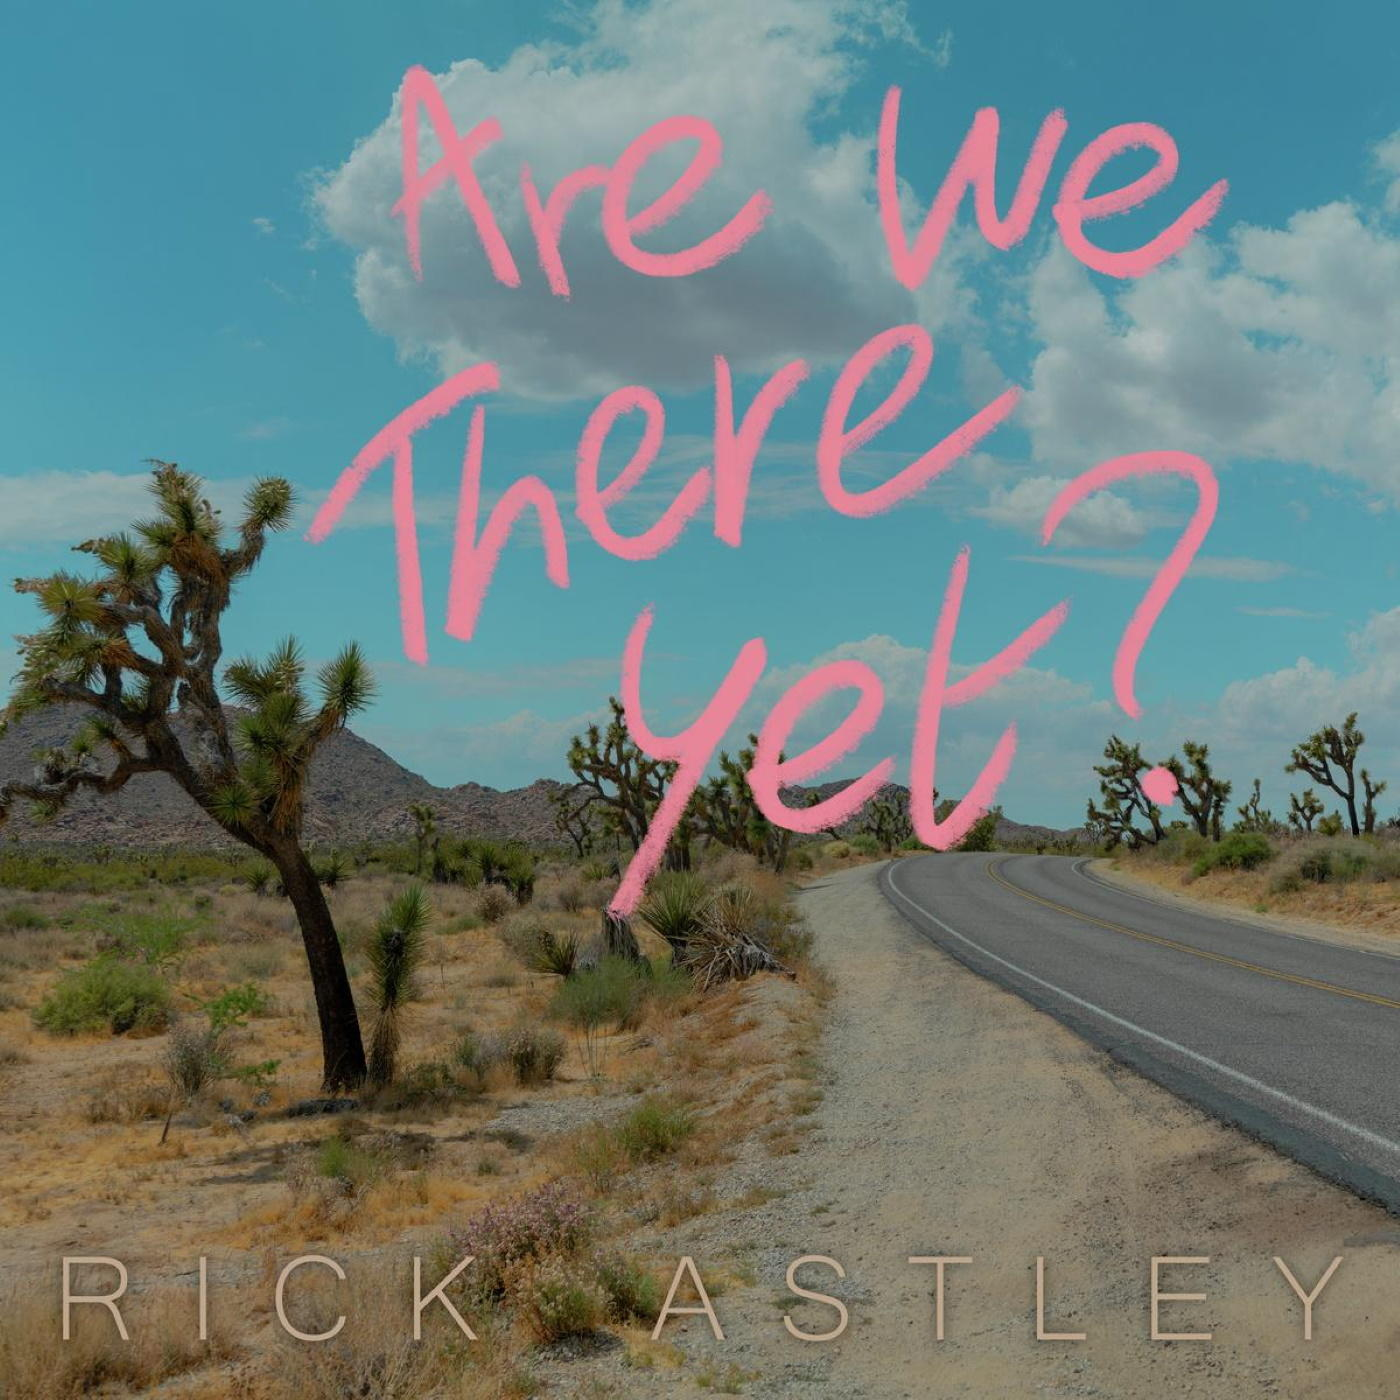 Rick Astley - - Are We There Yet?(Ltd.Edition Vinyl) Clear (Vinyl)